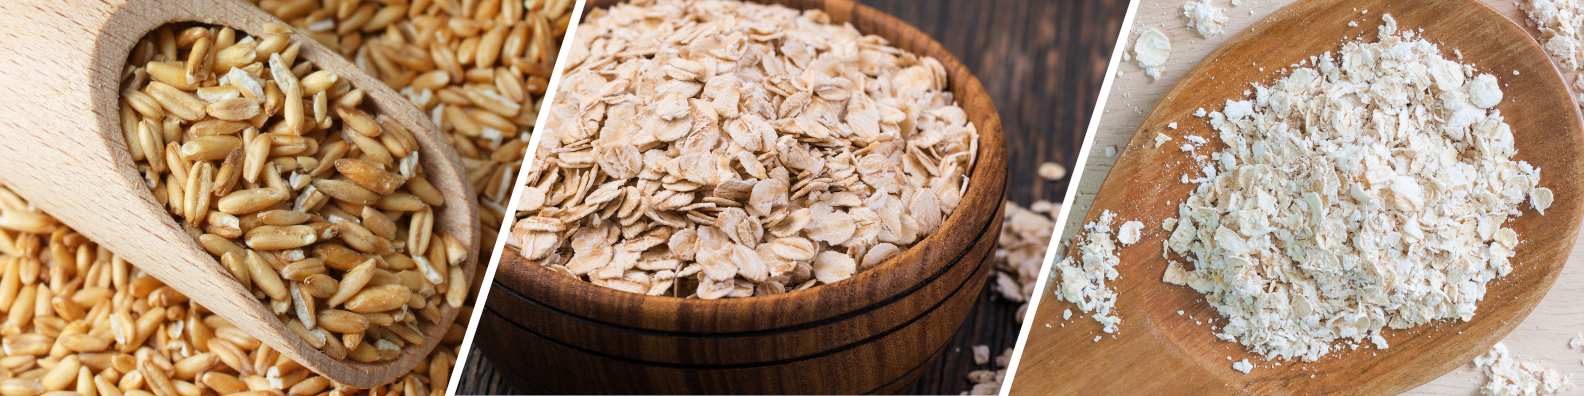 Different Types of Oats: